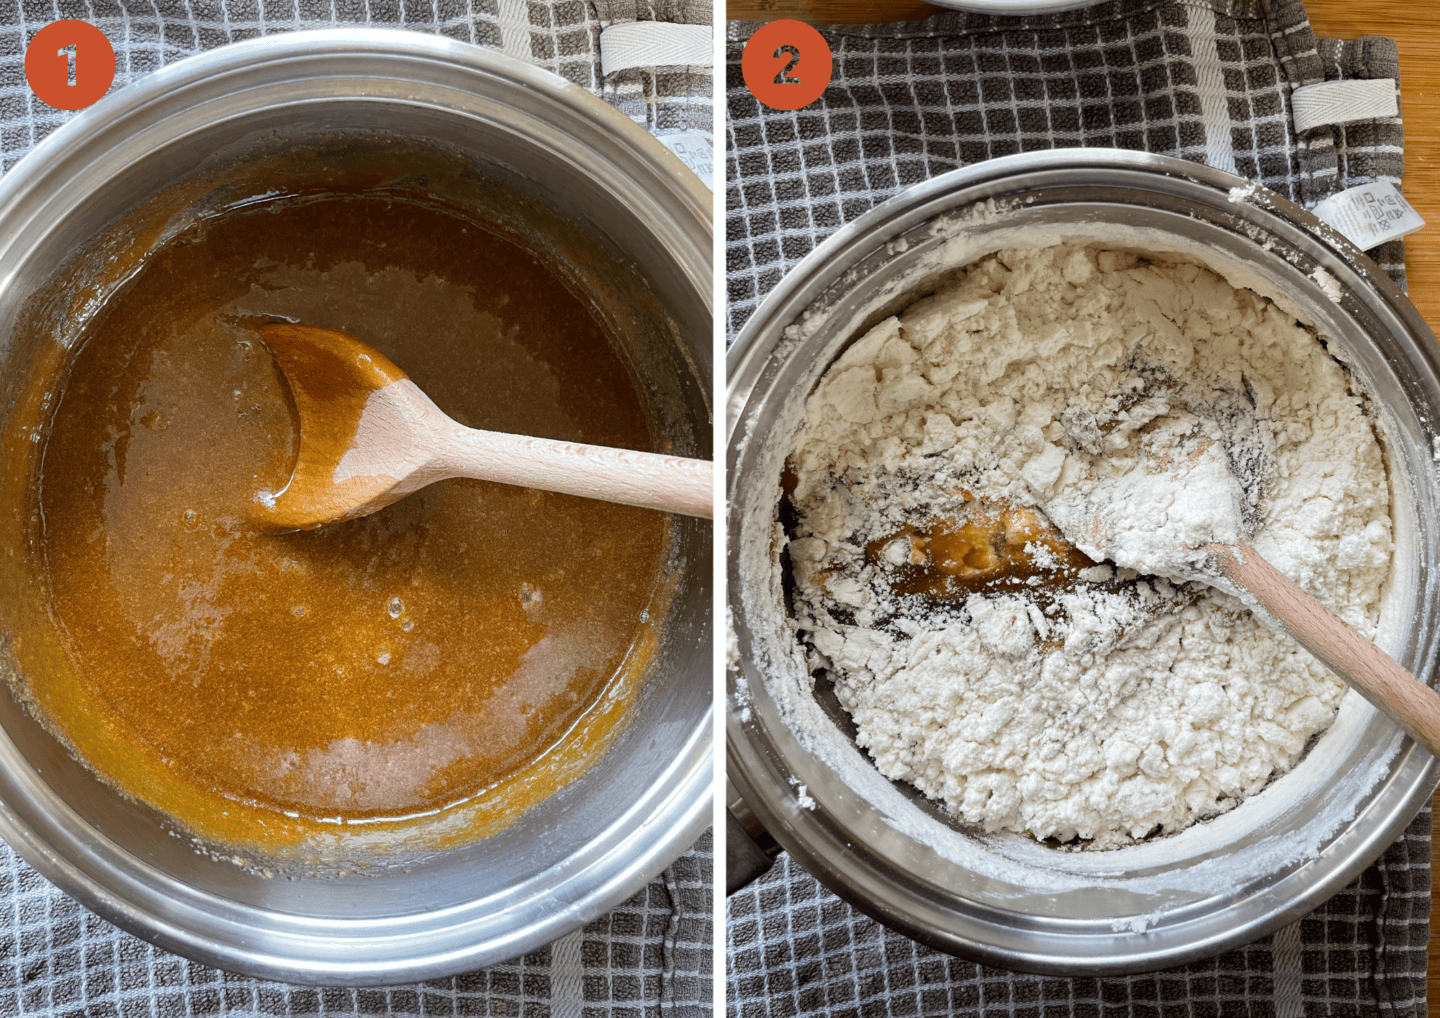 The melted butter and sugar (left) and with the flour added in (right) in a pan.